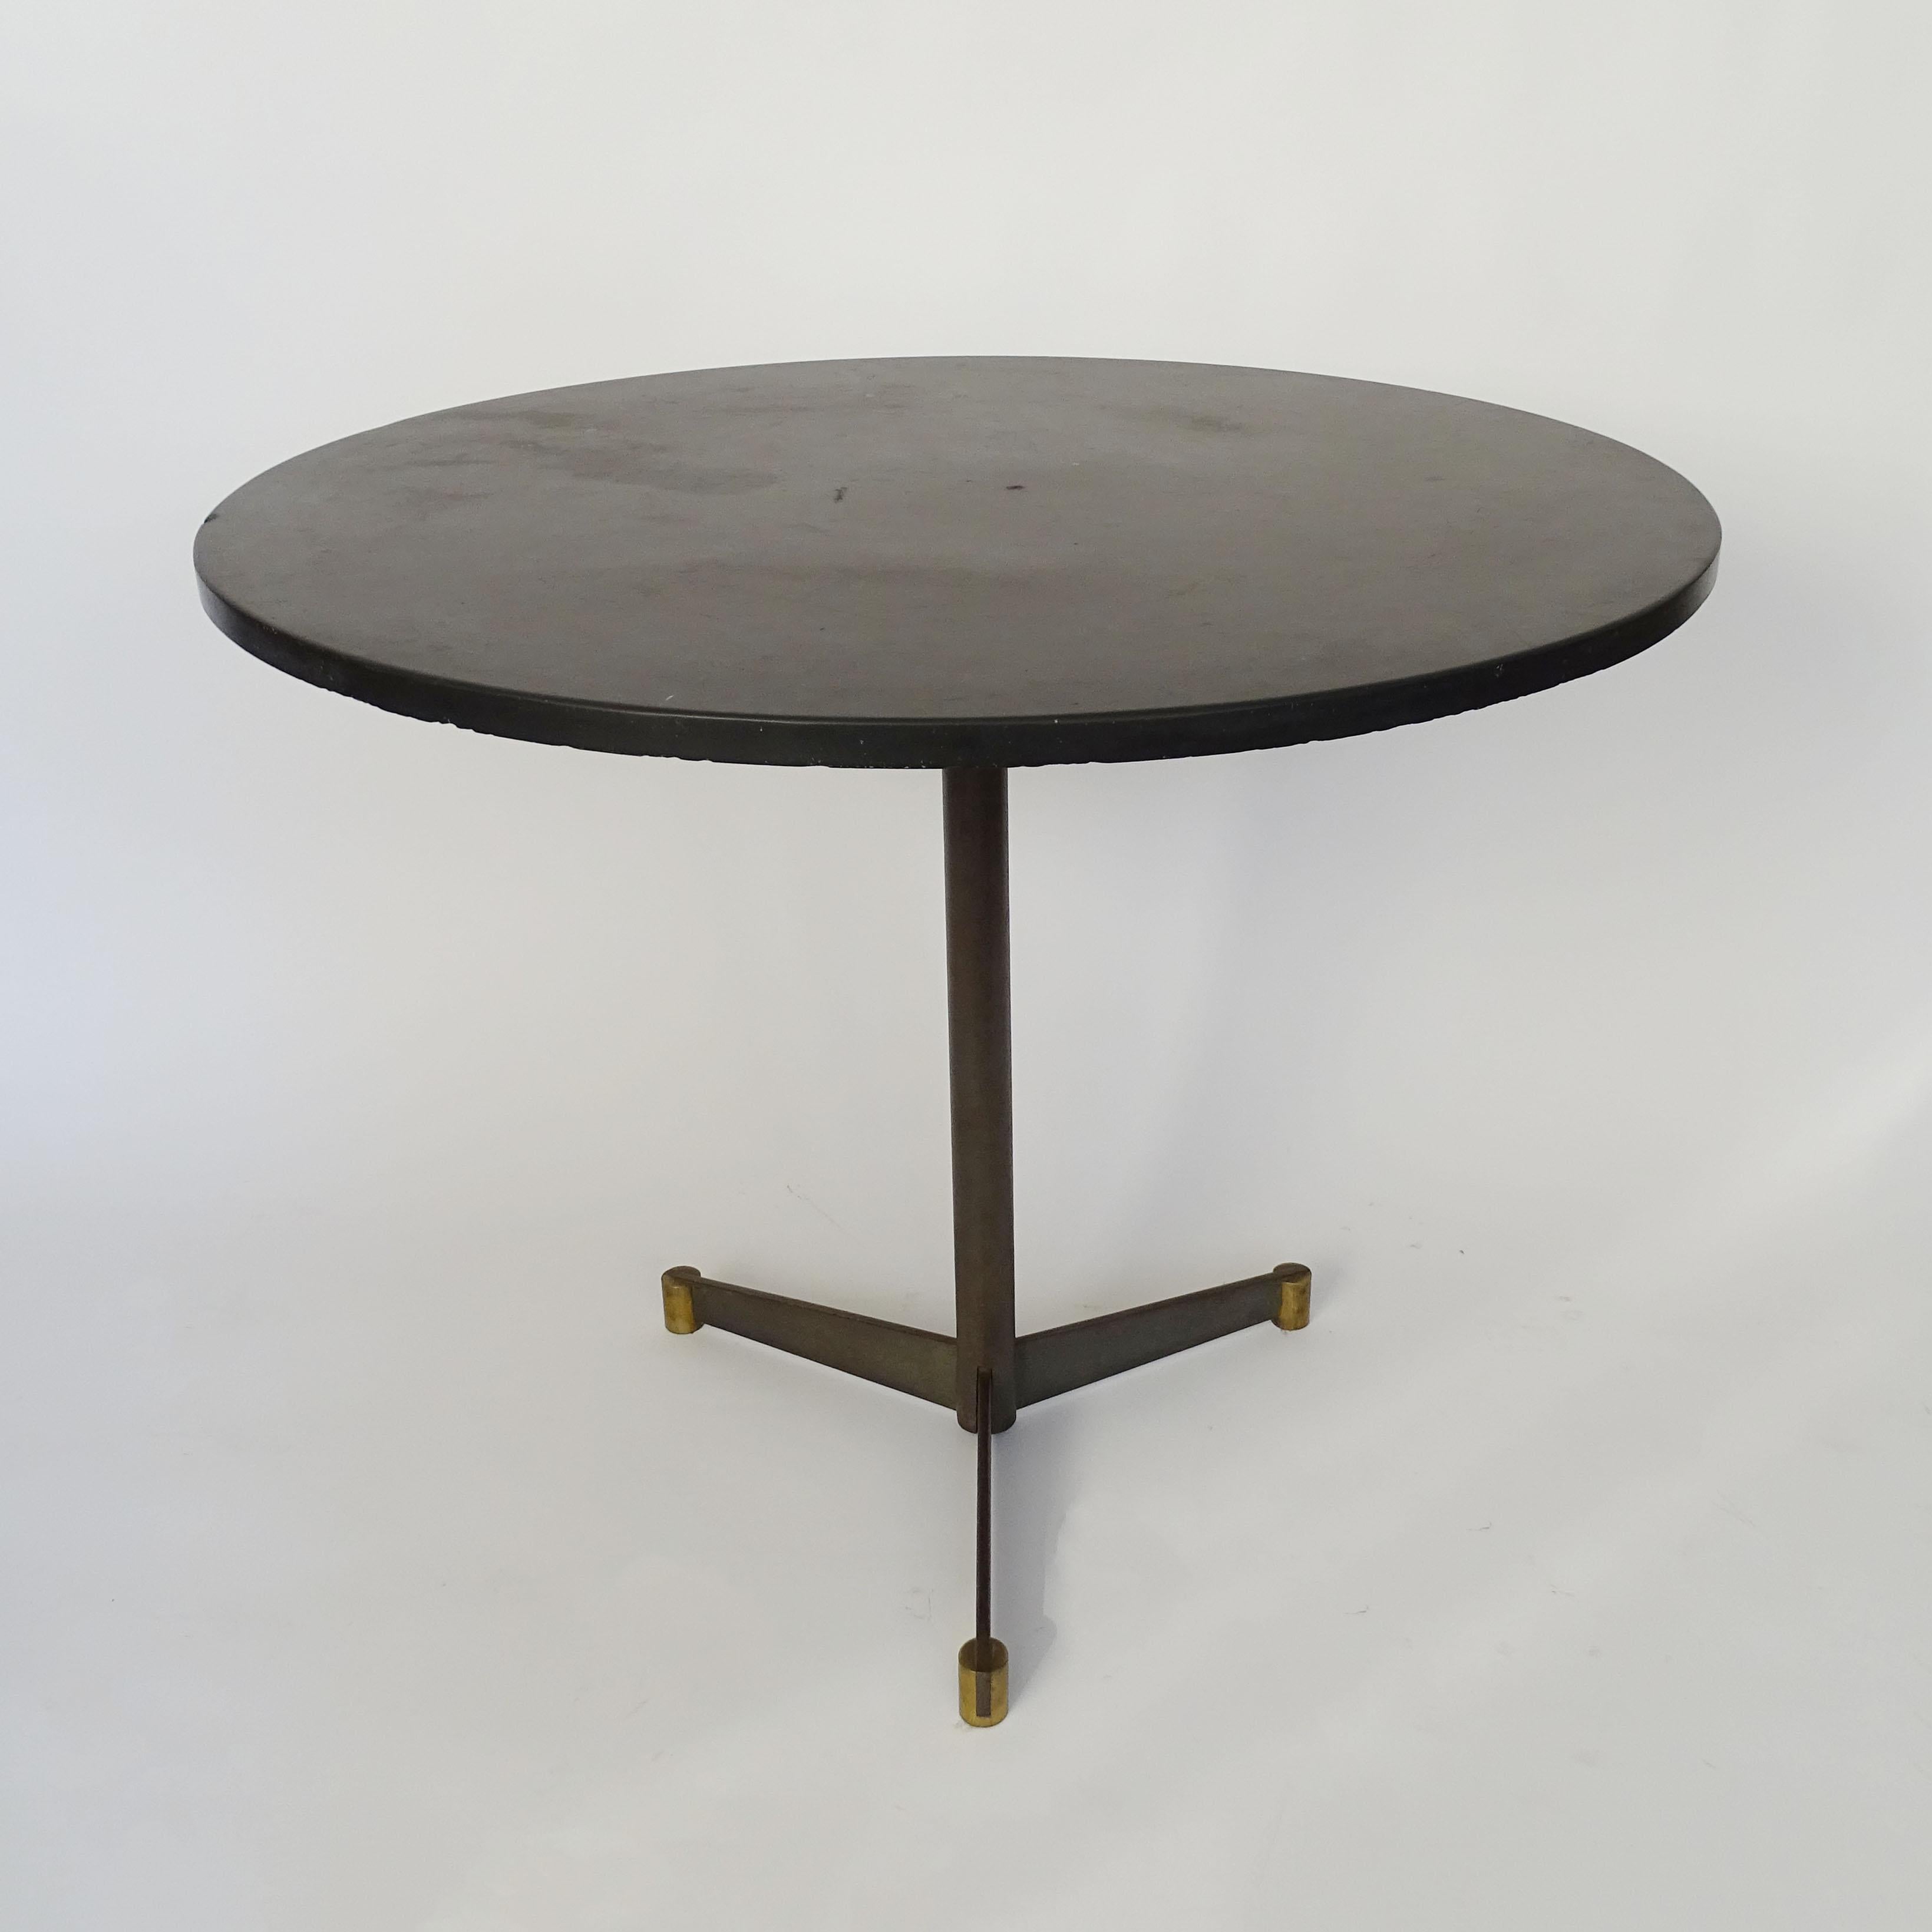 Italian Rationalist round dining table in Brass, Iron and Slate  2